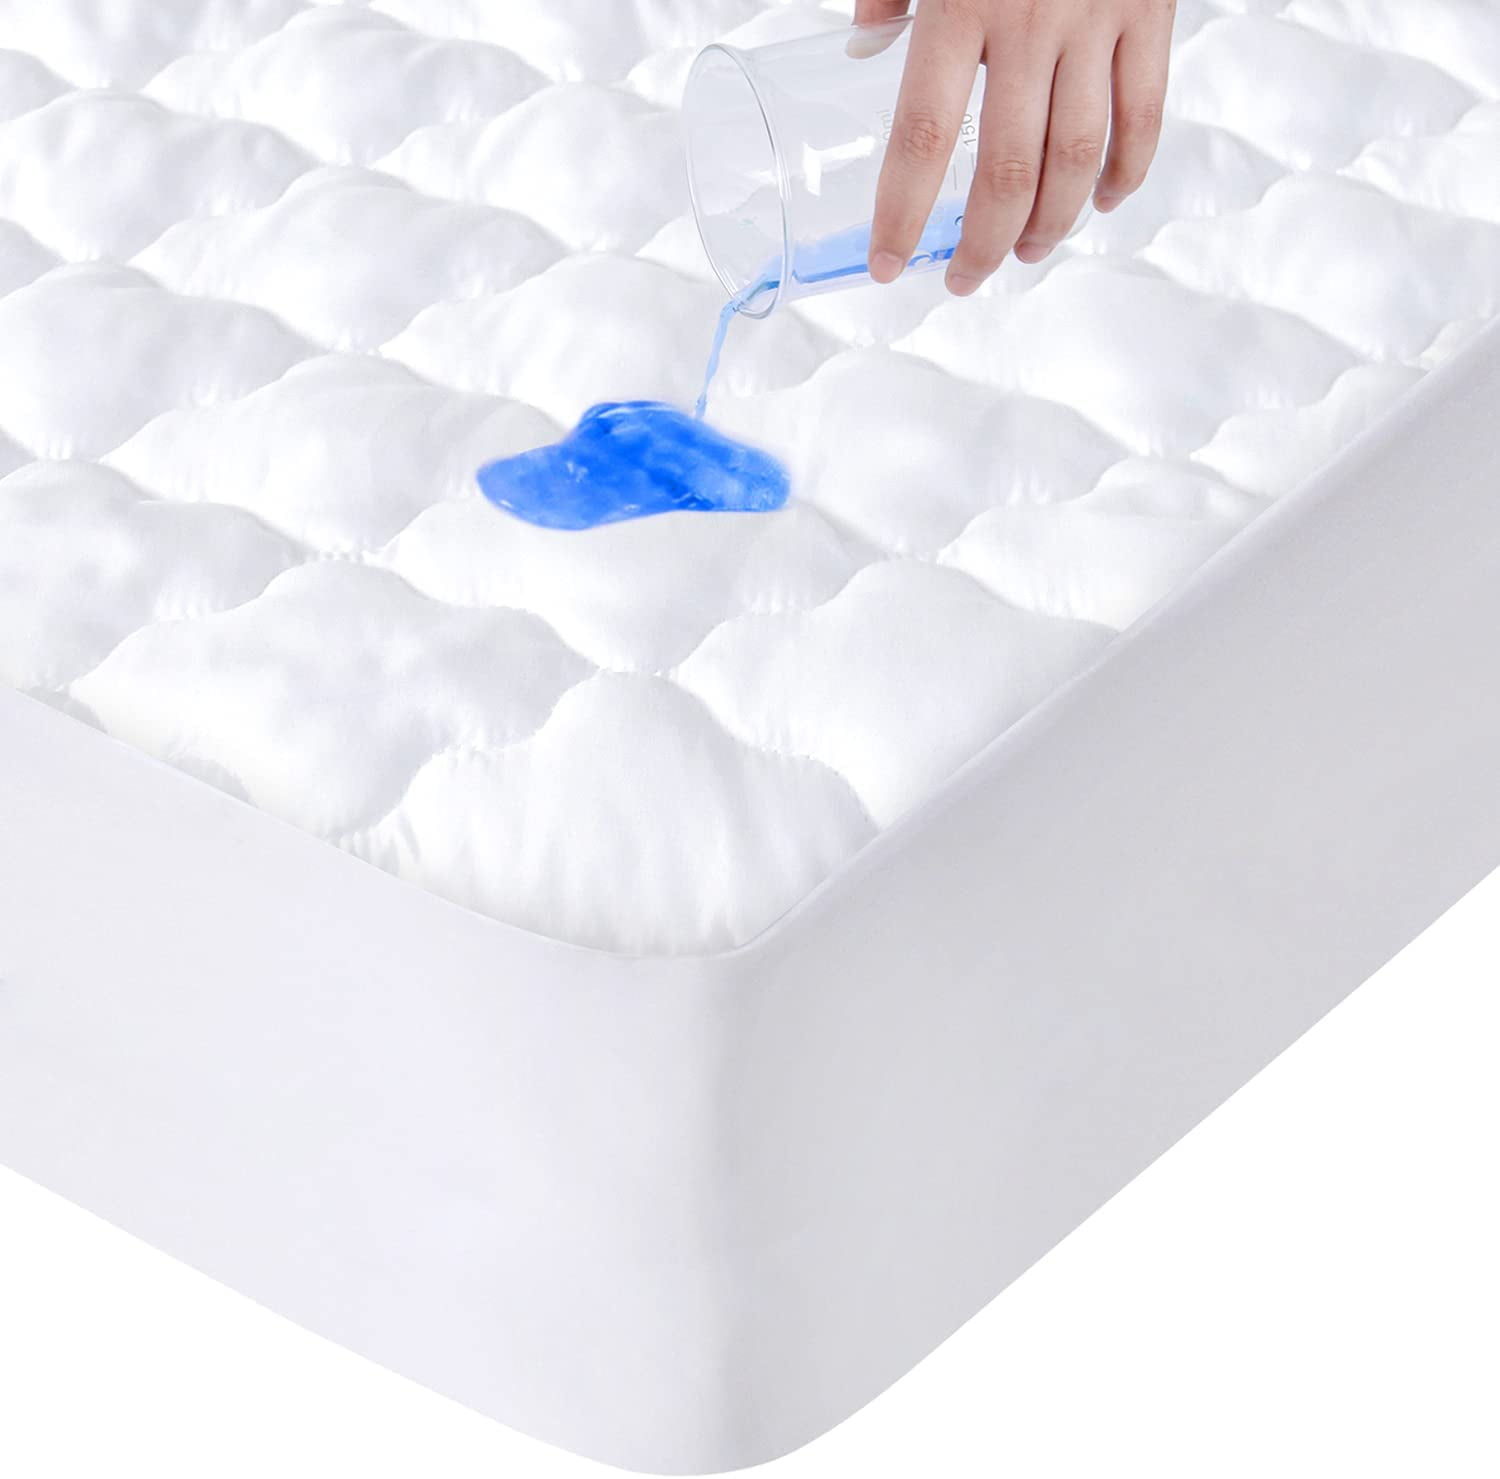 Mattress Protector Full Size Waterproof Mattress Cover Washable Soft Cotton Terry Noiseless Bed Covers for Kids Pets Adults Fitted Sheet Deep Pocket 54x75 